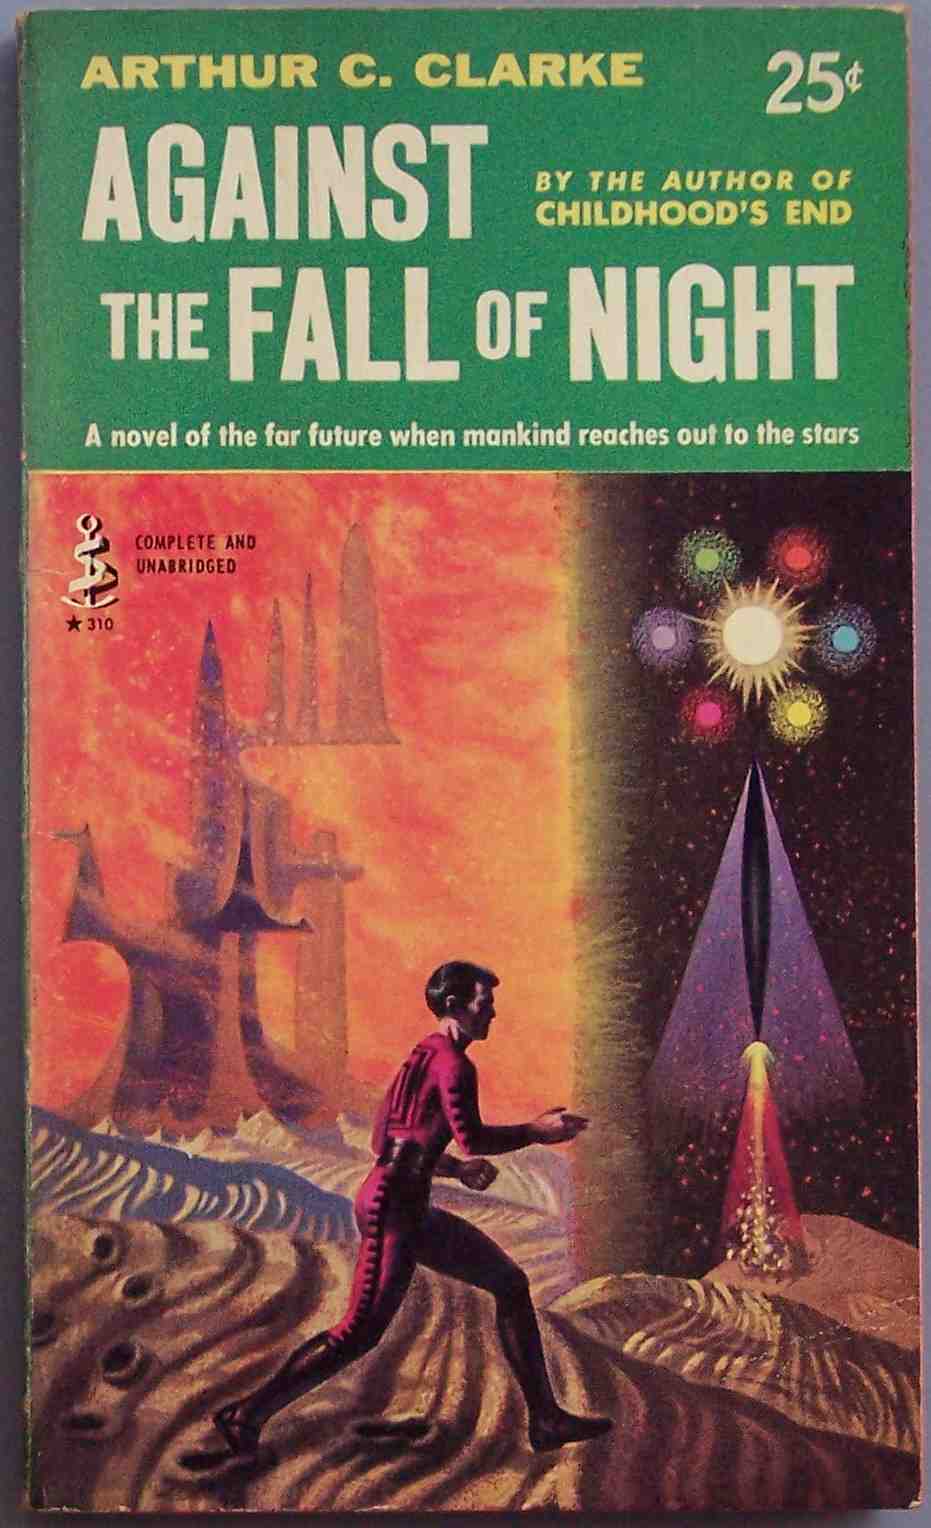 the book against the fall of night by arthur c clarke